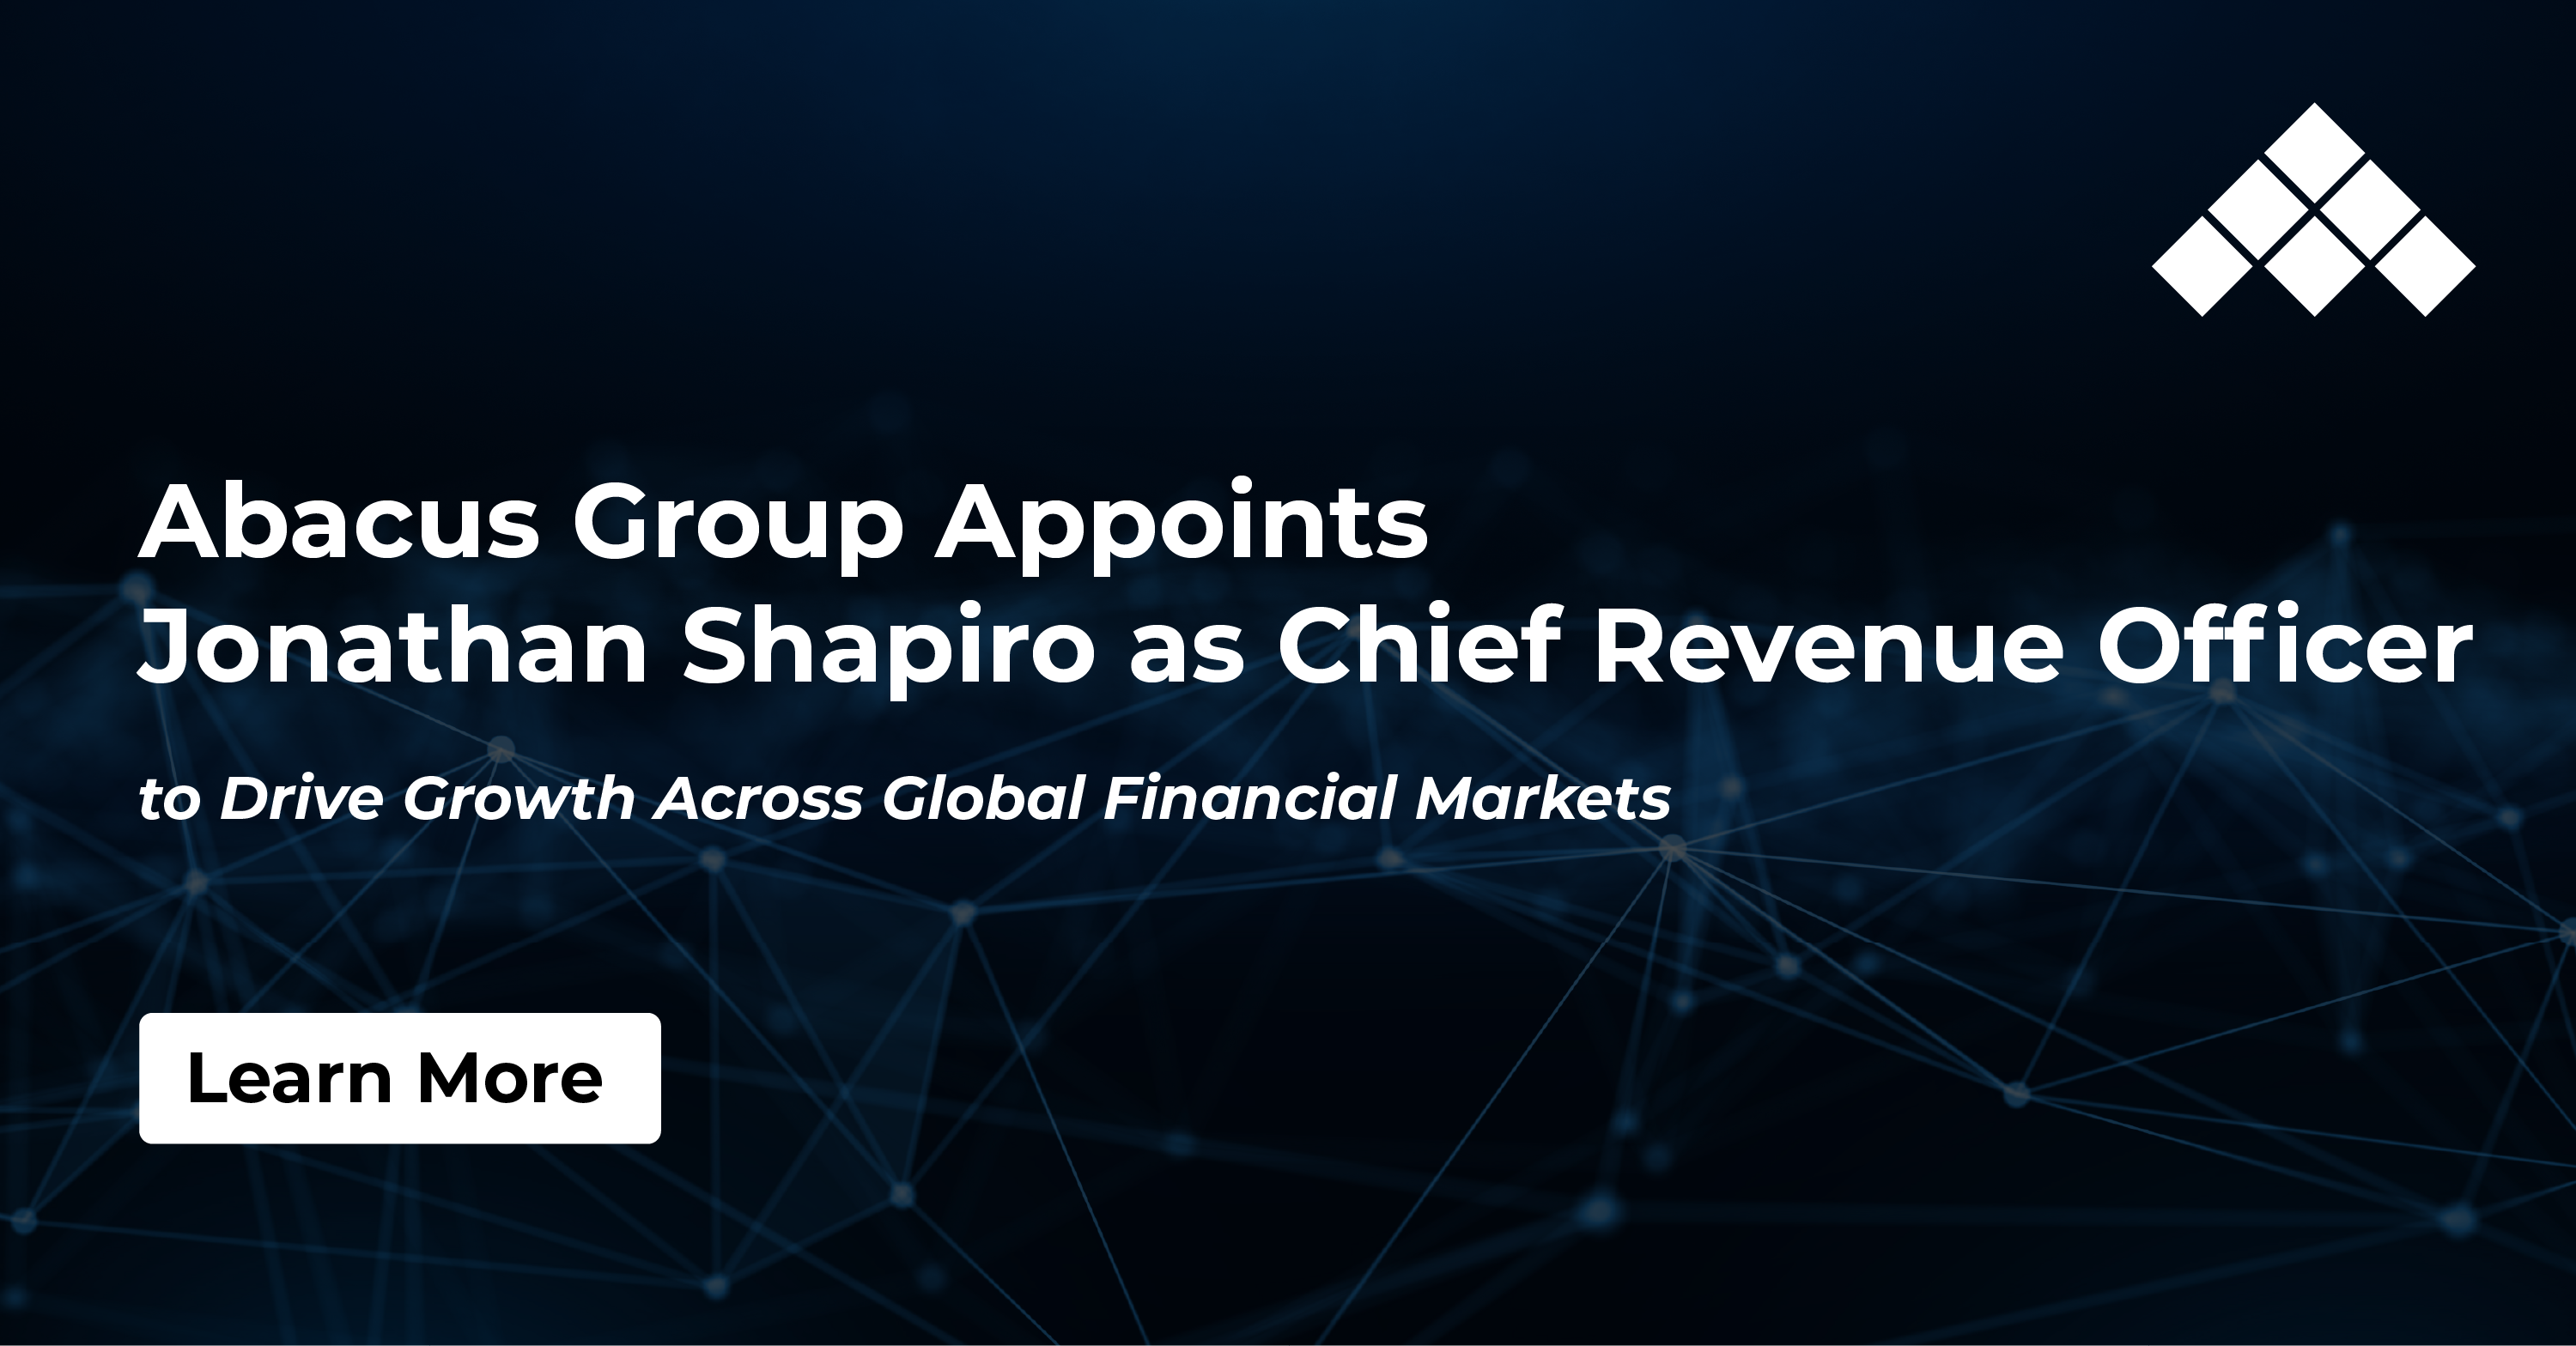 Abacus Group Appoints Jonathan Shapiro as Chief Revenue Officer to Drive Growth Across Global Financial Markets